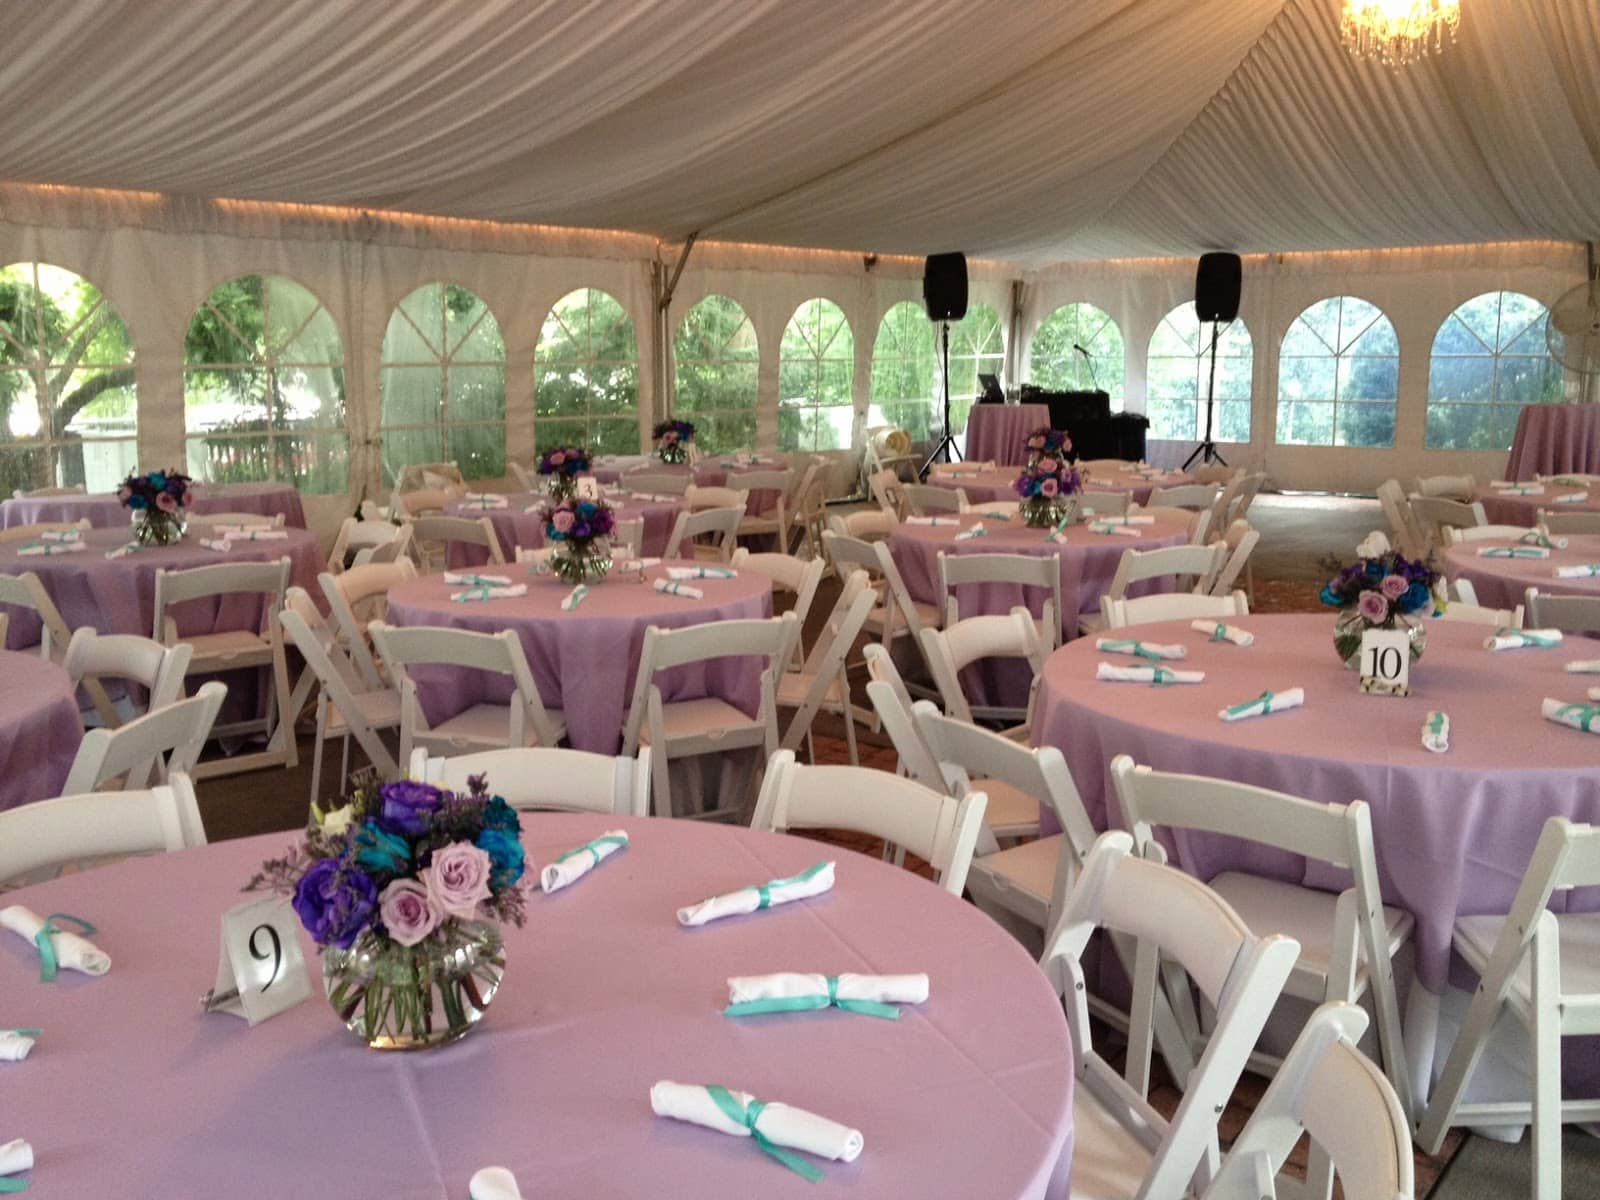 Ten Tips for Catering an Outdoor Wedding Reception - Northern VA, DC